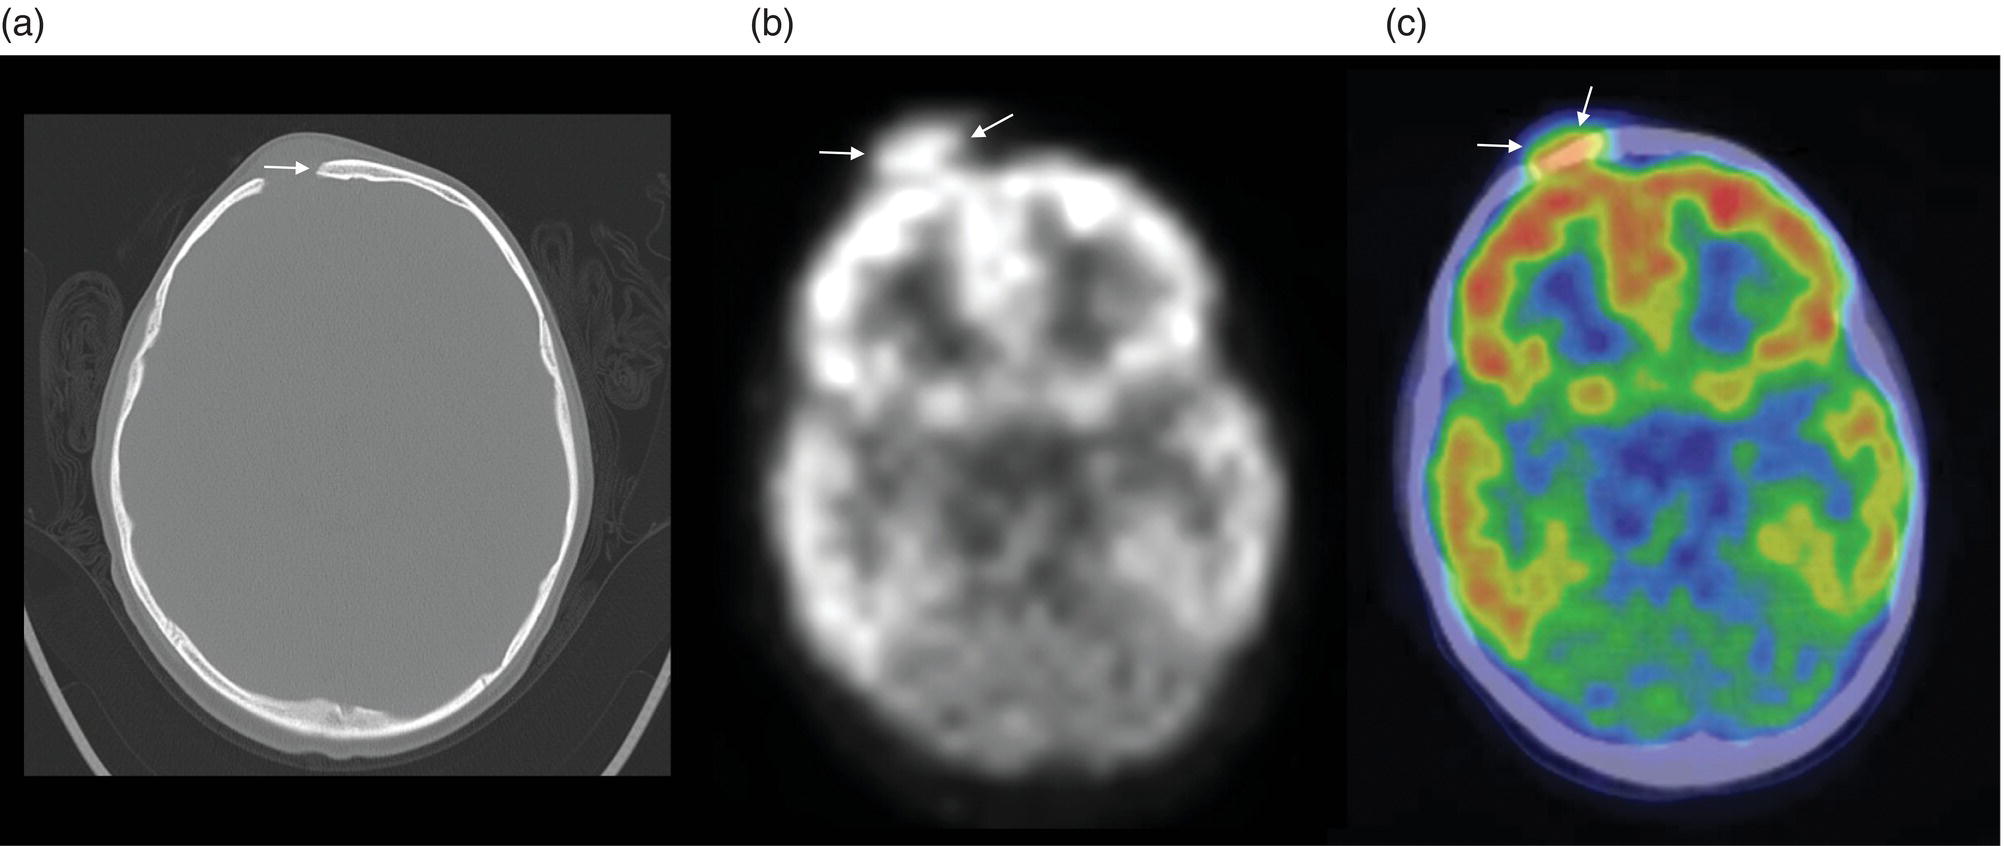 Schematic illustration of (a) 5-year-old male with right forehead swelling. (b) Axial 18FDG PET images with attenuation correction of the brain show intense uptake in the area of the frontal bone lesion (white arrows). (c) Fused axial PET-CT images of the brain demonstrating frontal bone lesion with mass with focal intense radiotracer uptake in the defect (white arrows). 